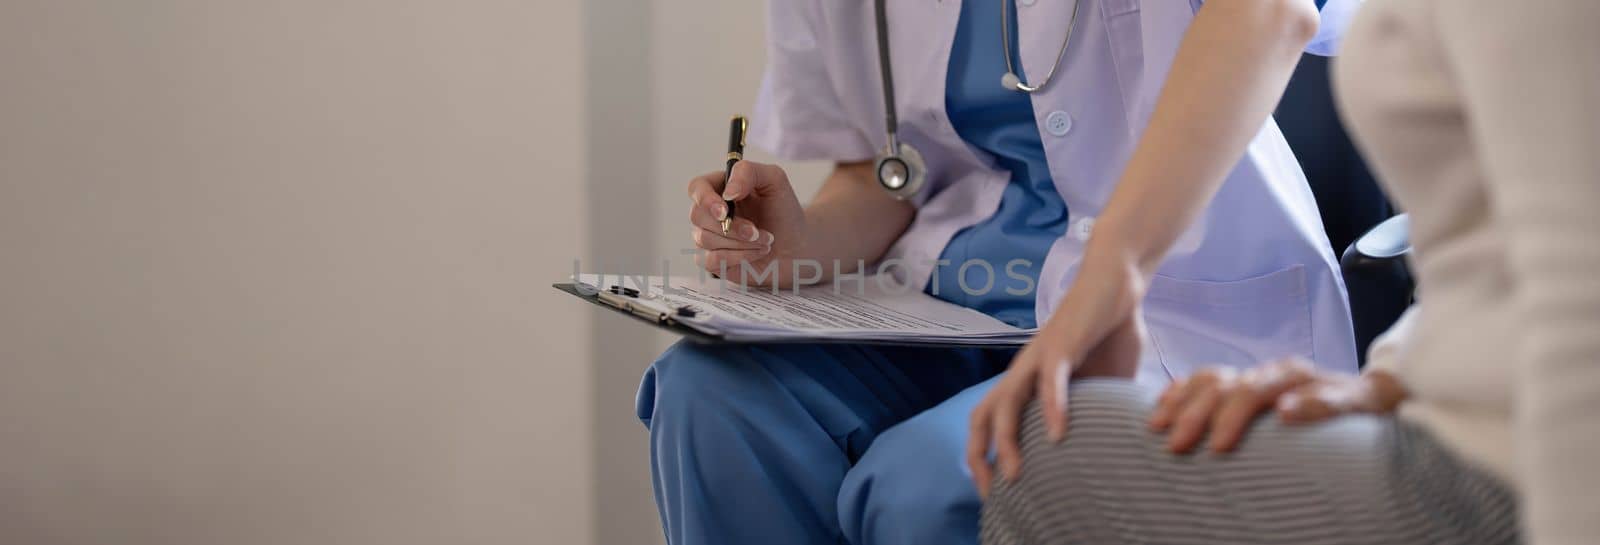 Asian female patient undergoing health check up while female doctor uses stethoscope to check heart rate in nurse, health care concept..